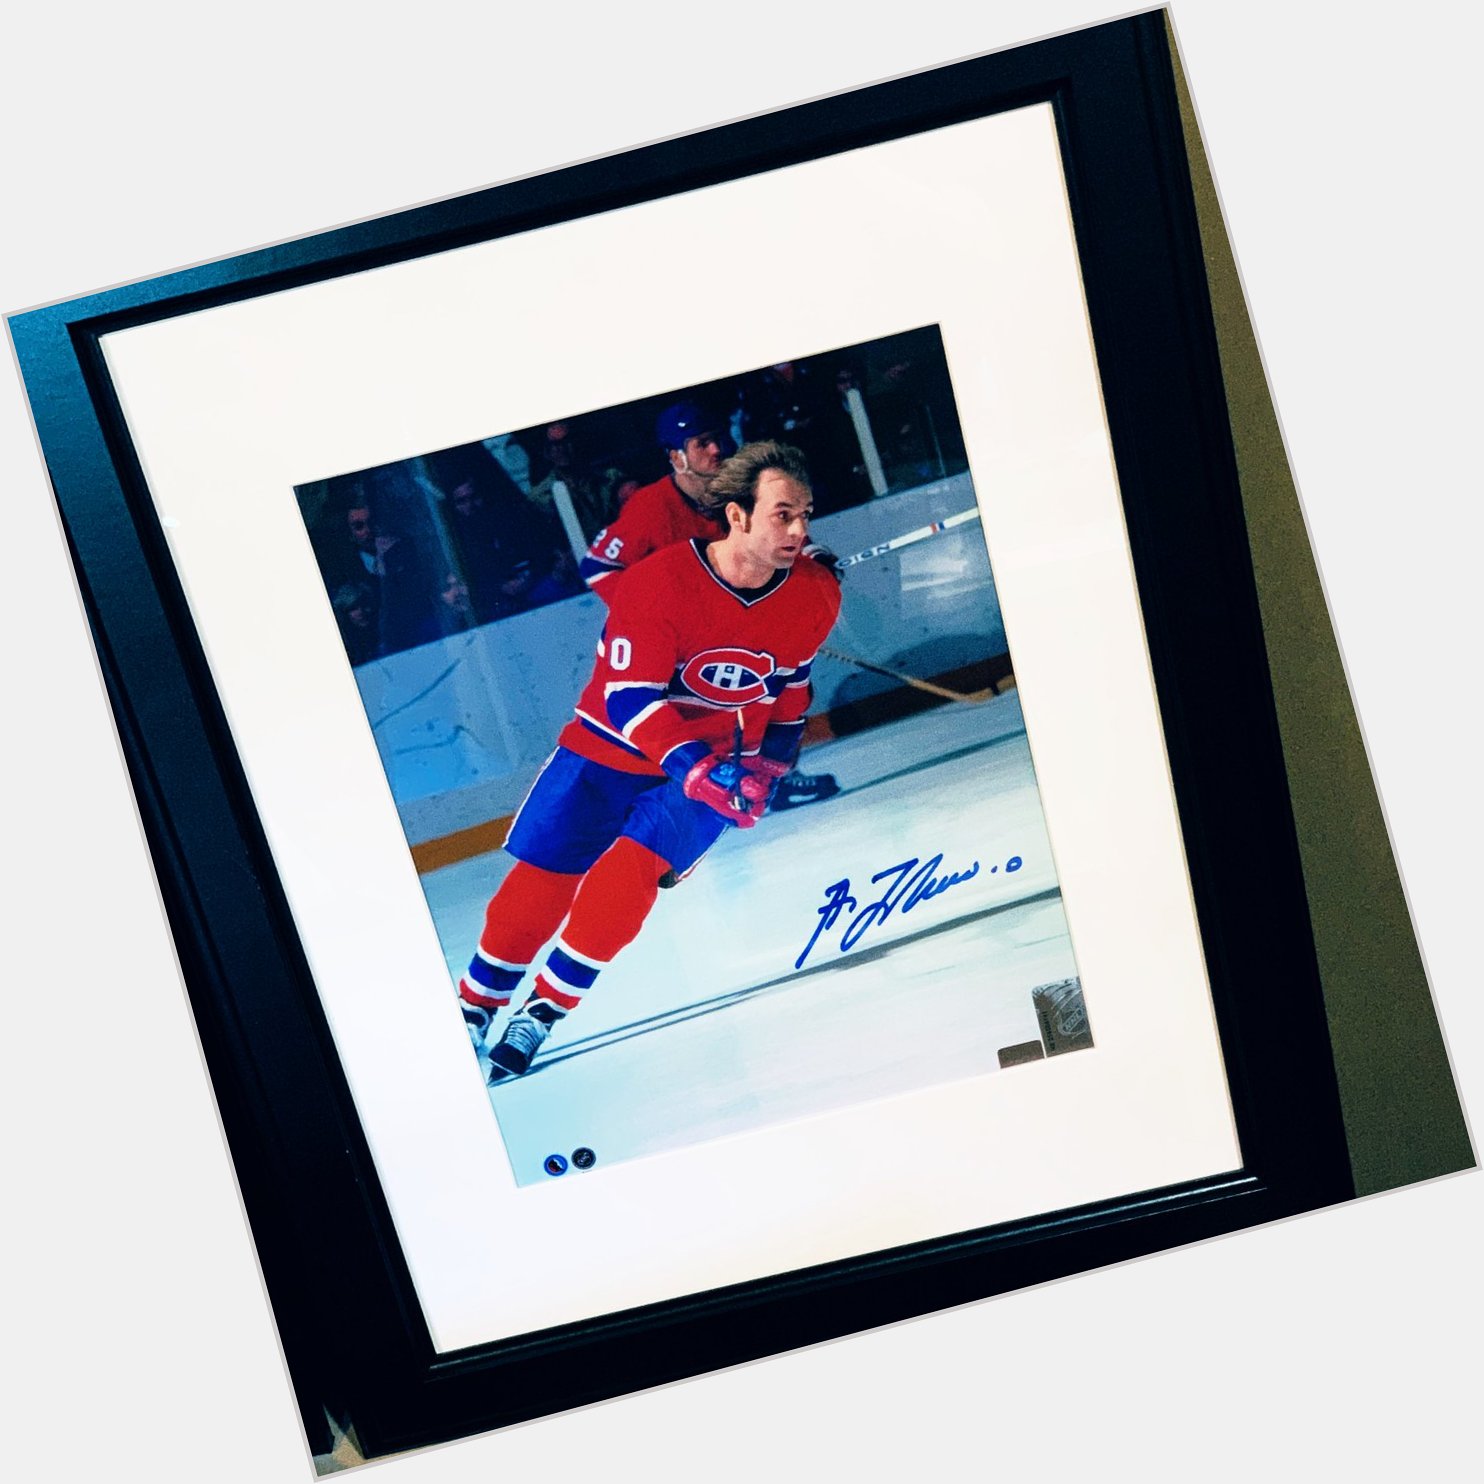 Happy Birthday to Guy Lafleur today, and thanks for the autograph.    